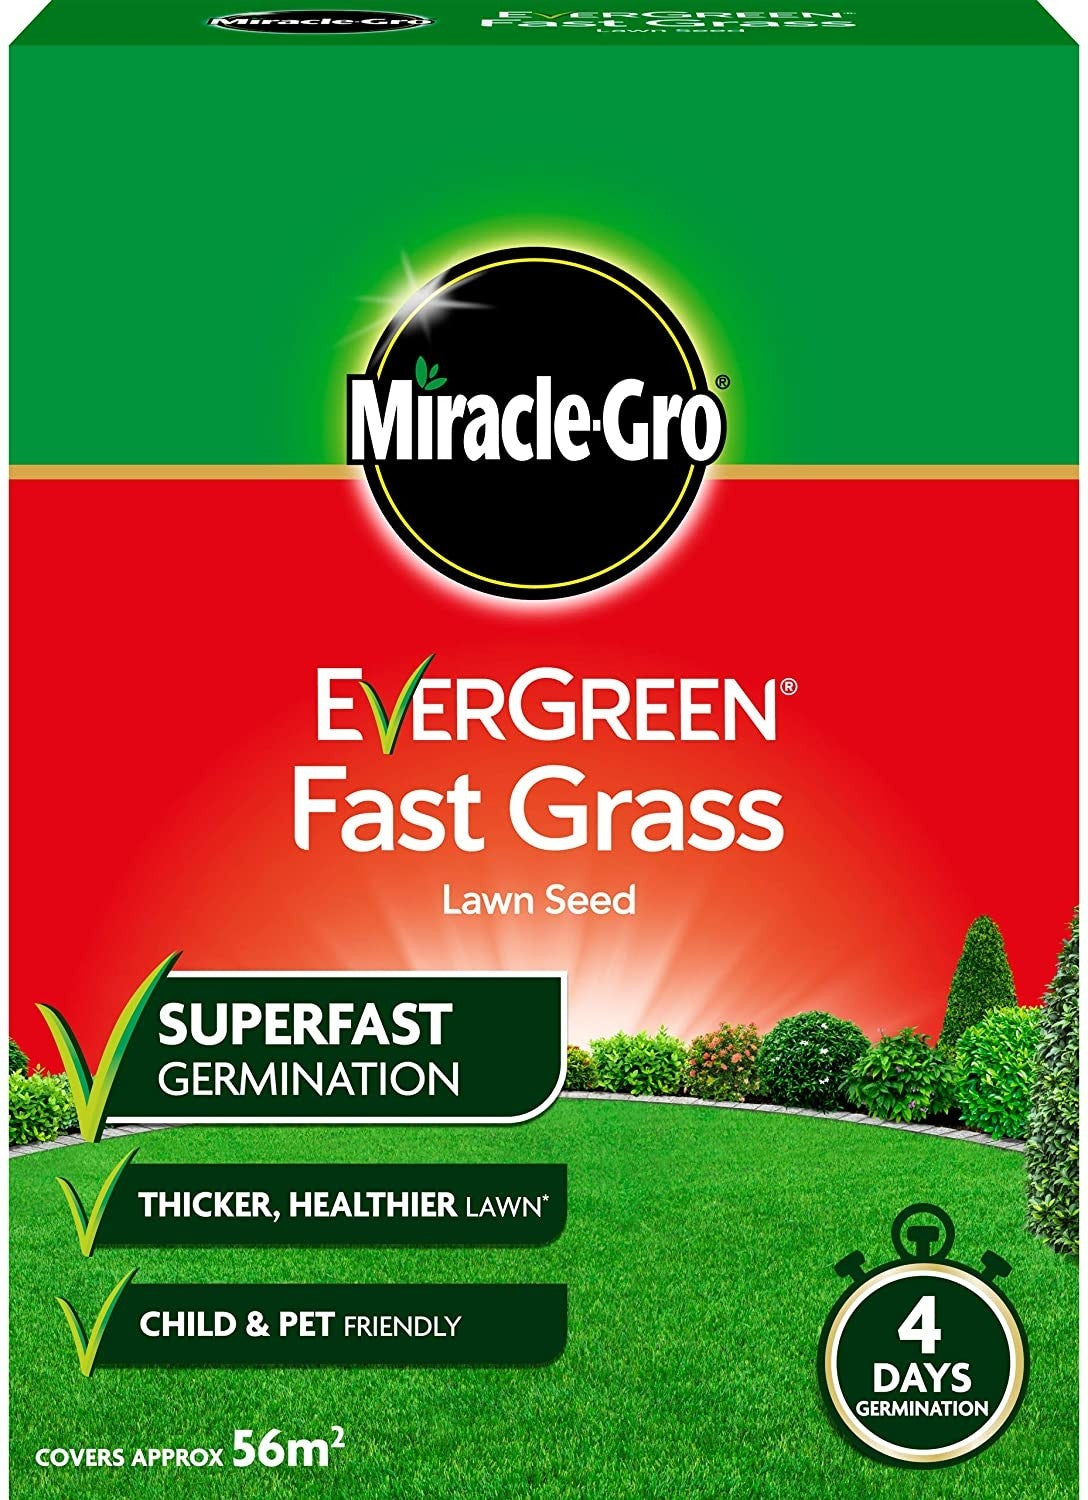 Miracle-Gro Evergreen Fast Grass Lawn Seed 1.6kg